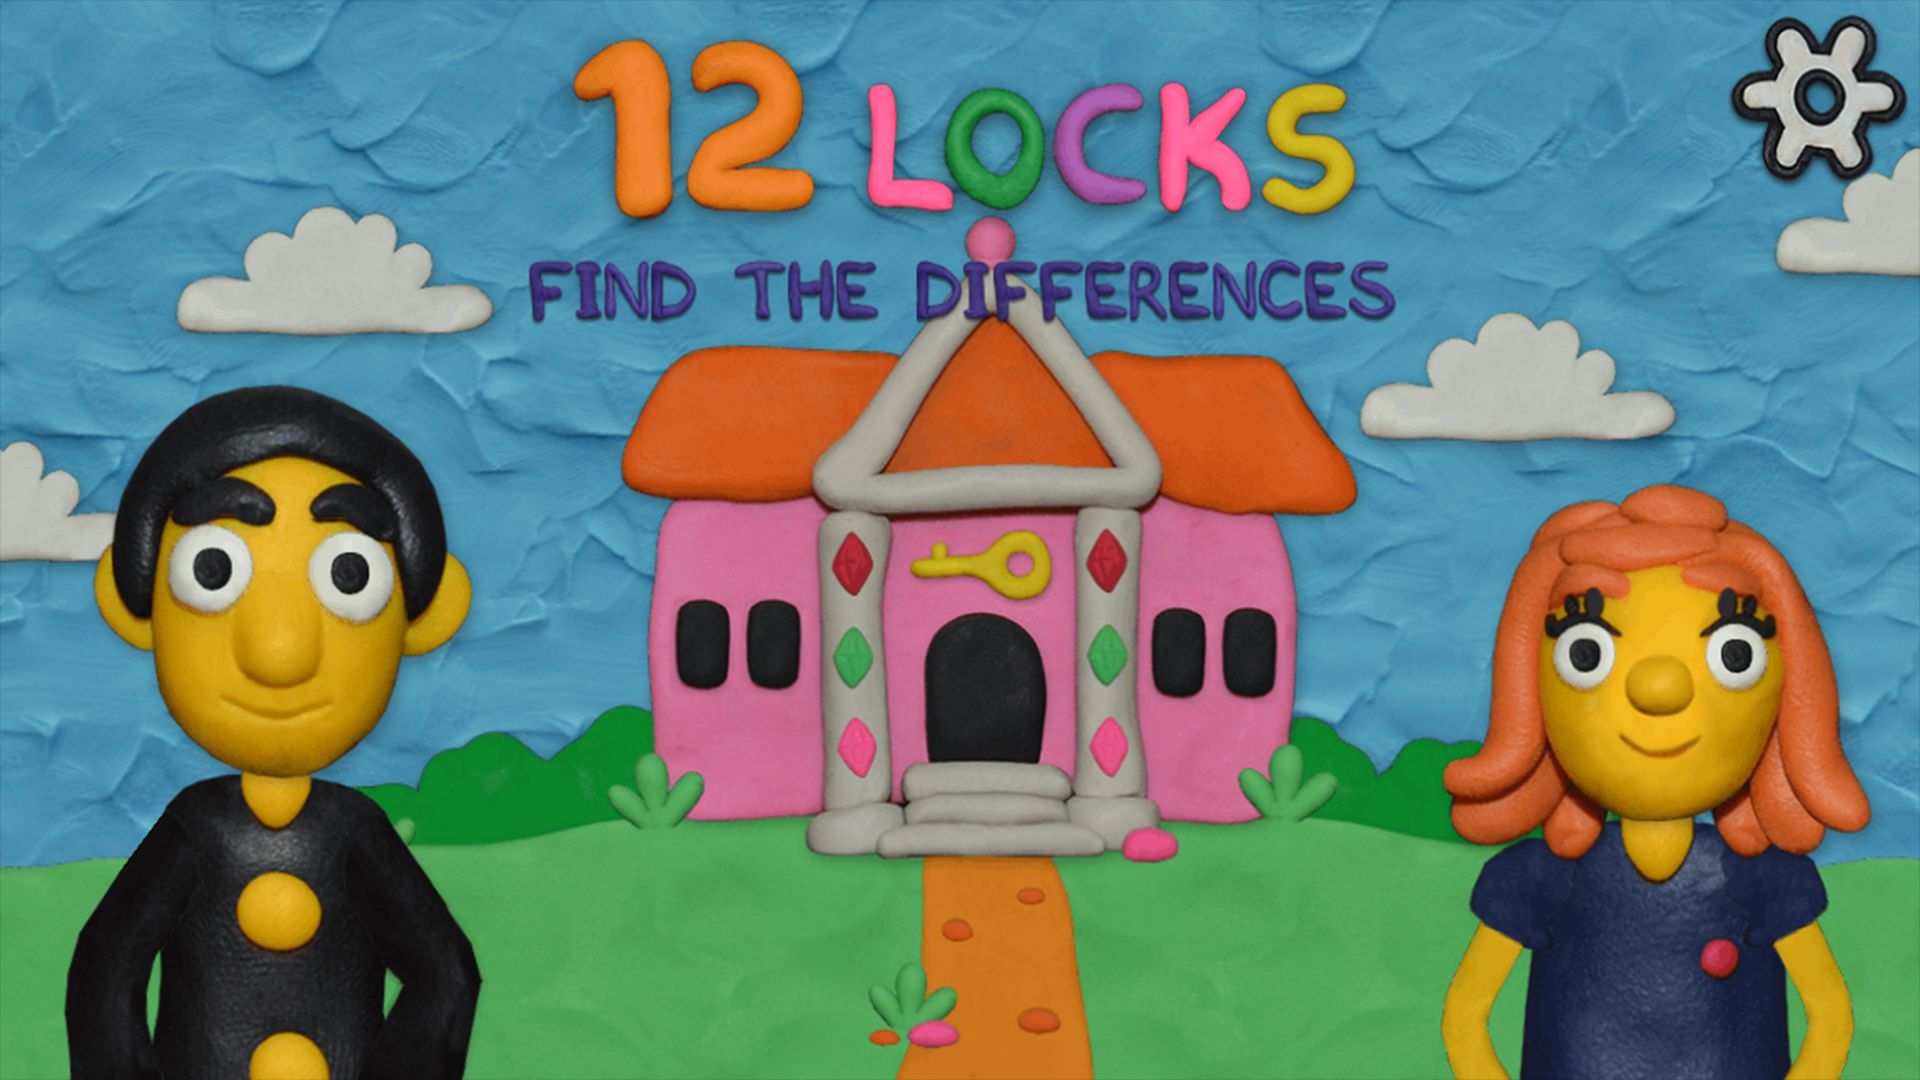 Download 12 Locks Find the differences Android free game.